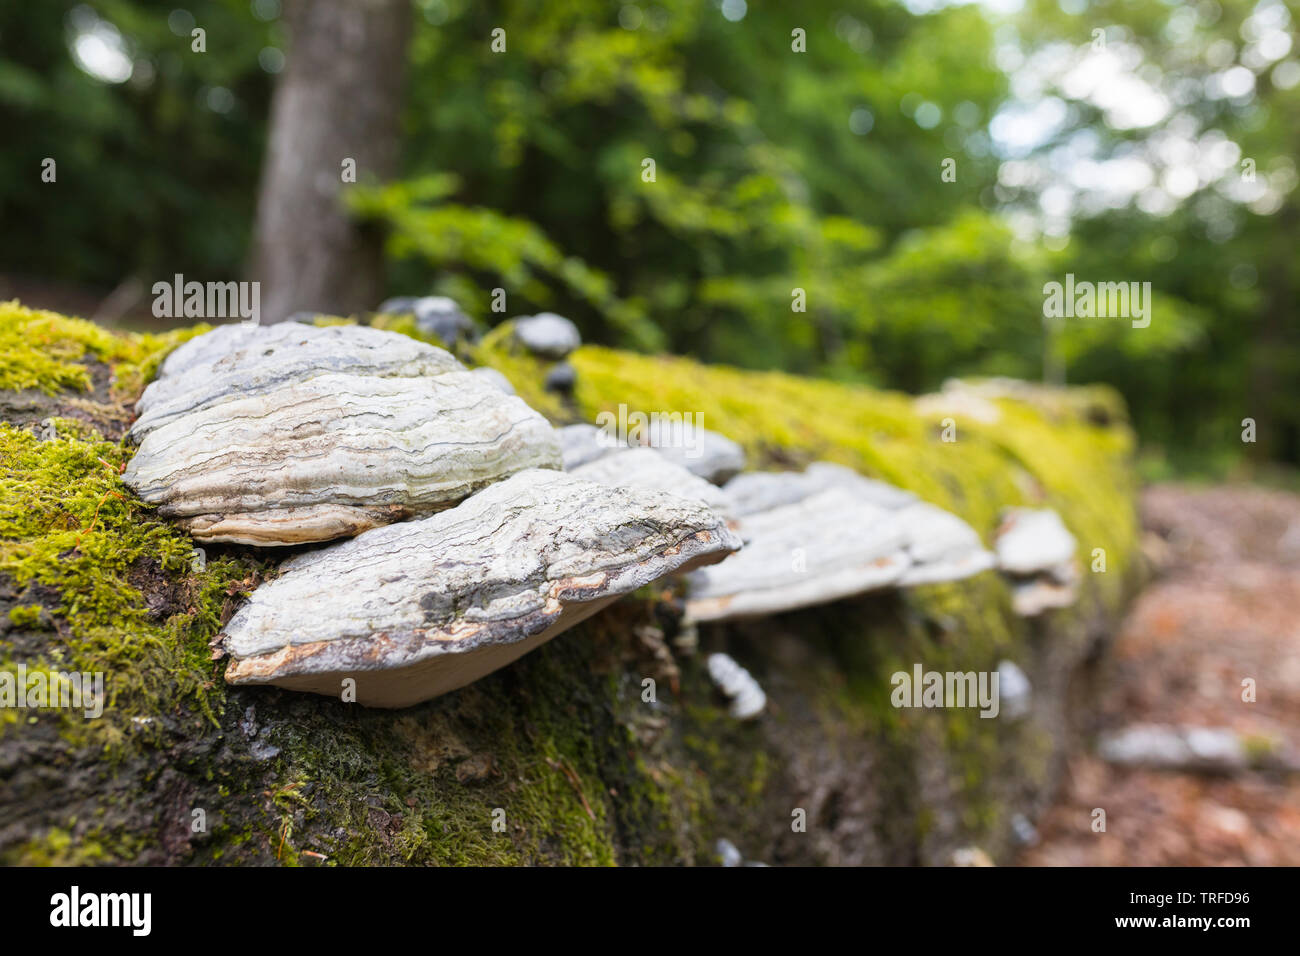 Tinder mushrooms on a trunk in a forest in Belgium Ardennes near Bertrix Stock Photo